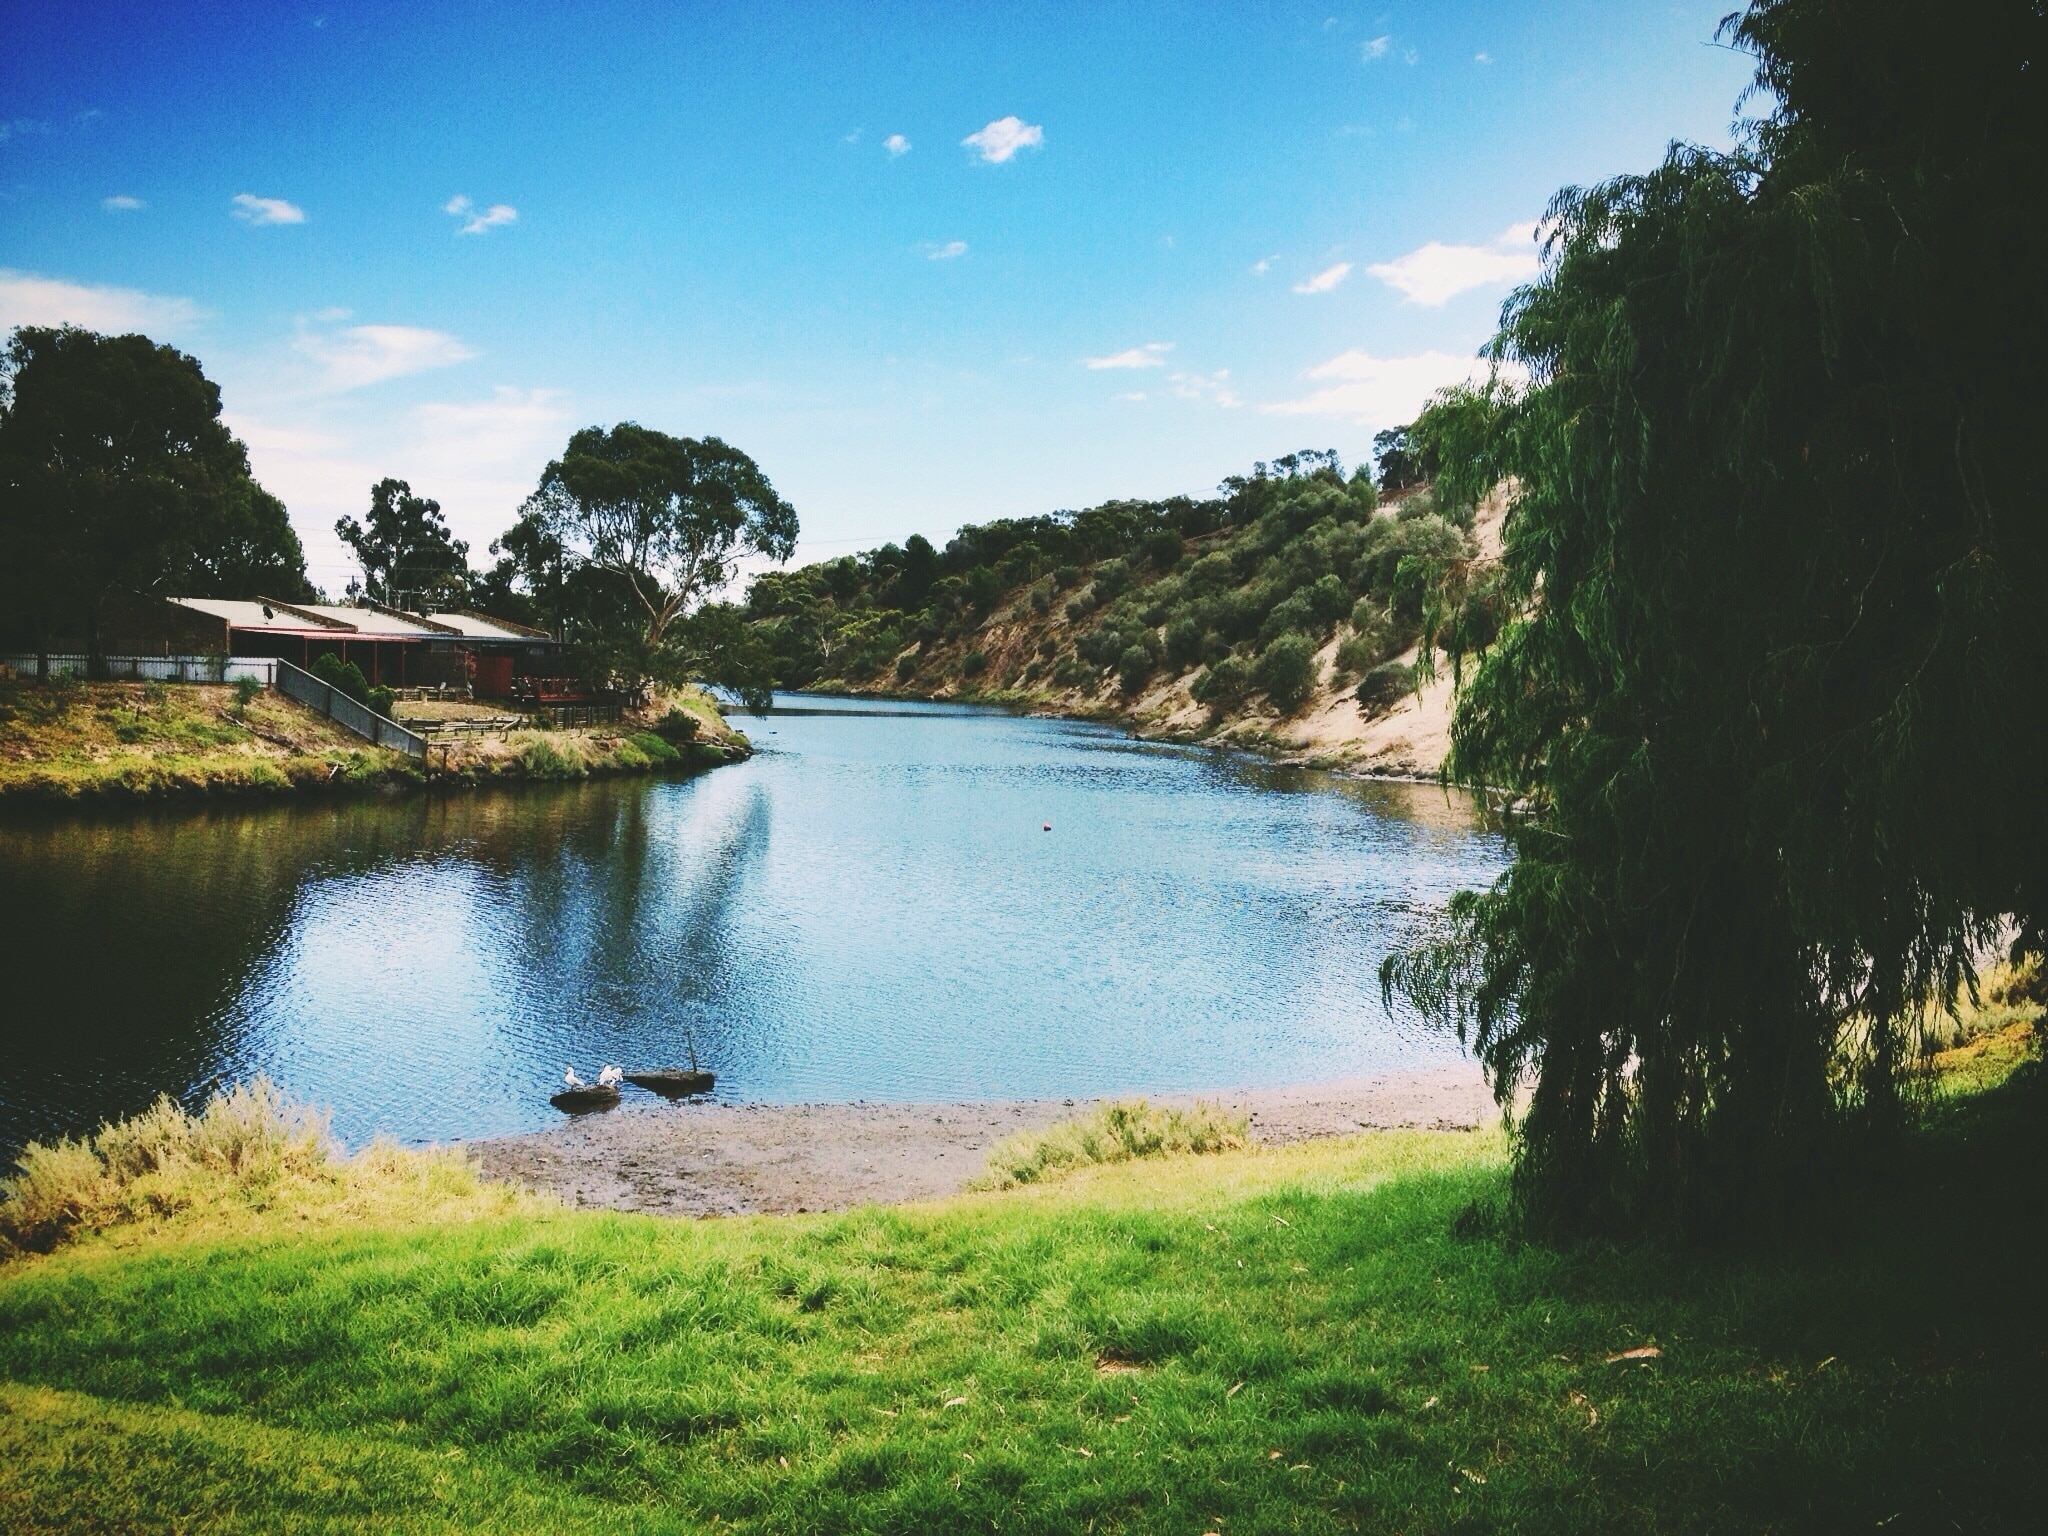 River by the park in Old Noarlunga, South Australia